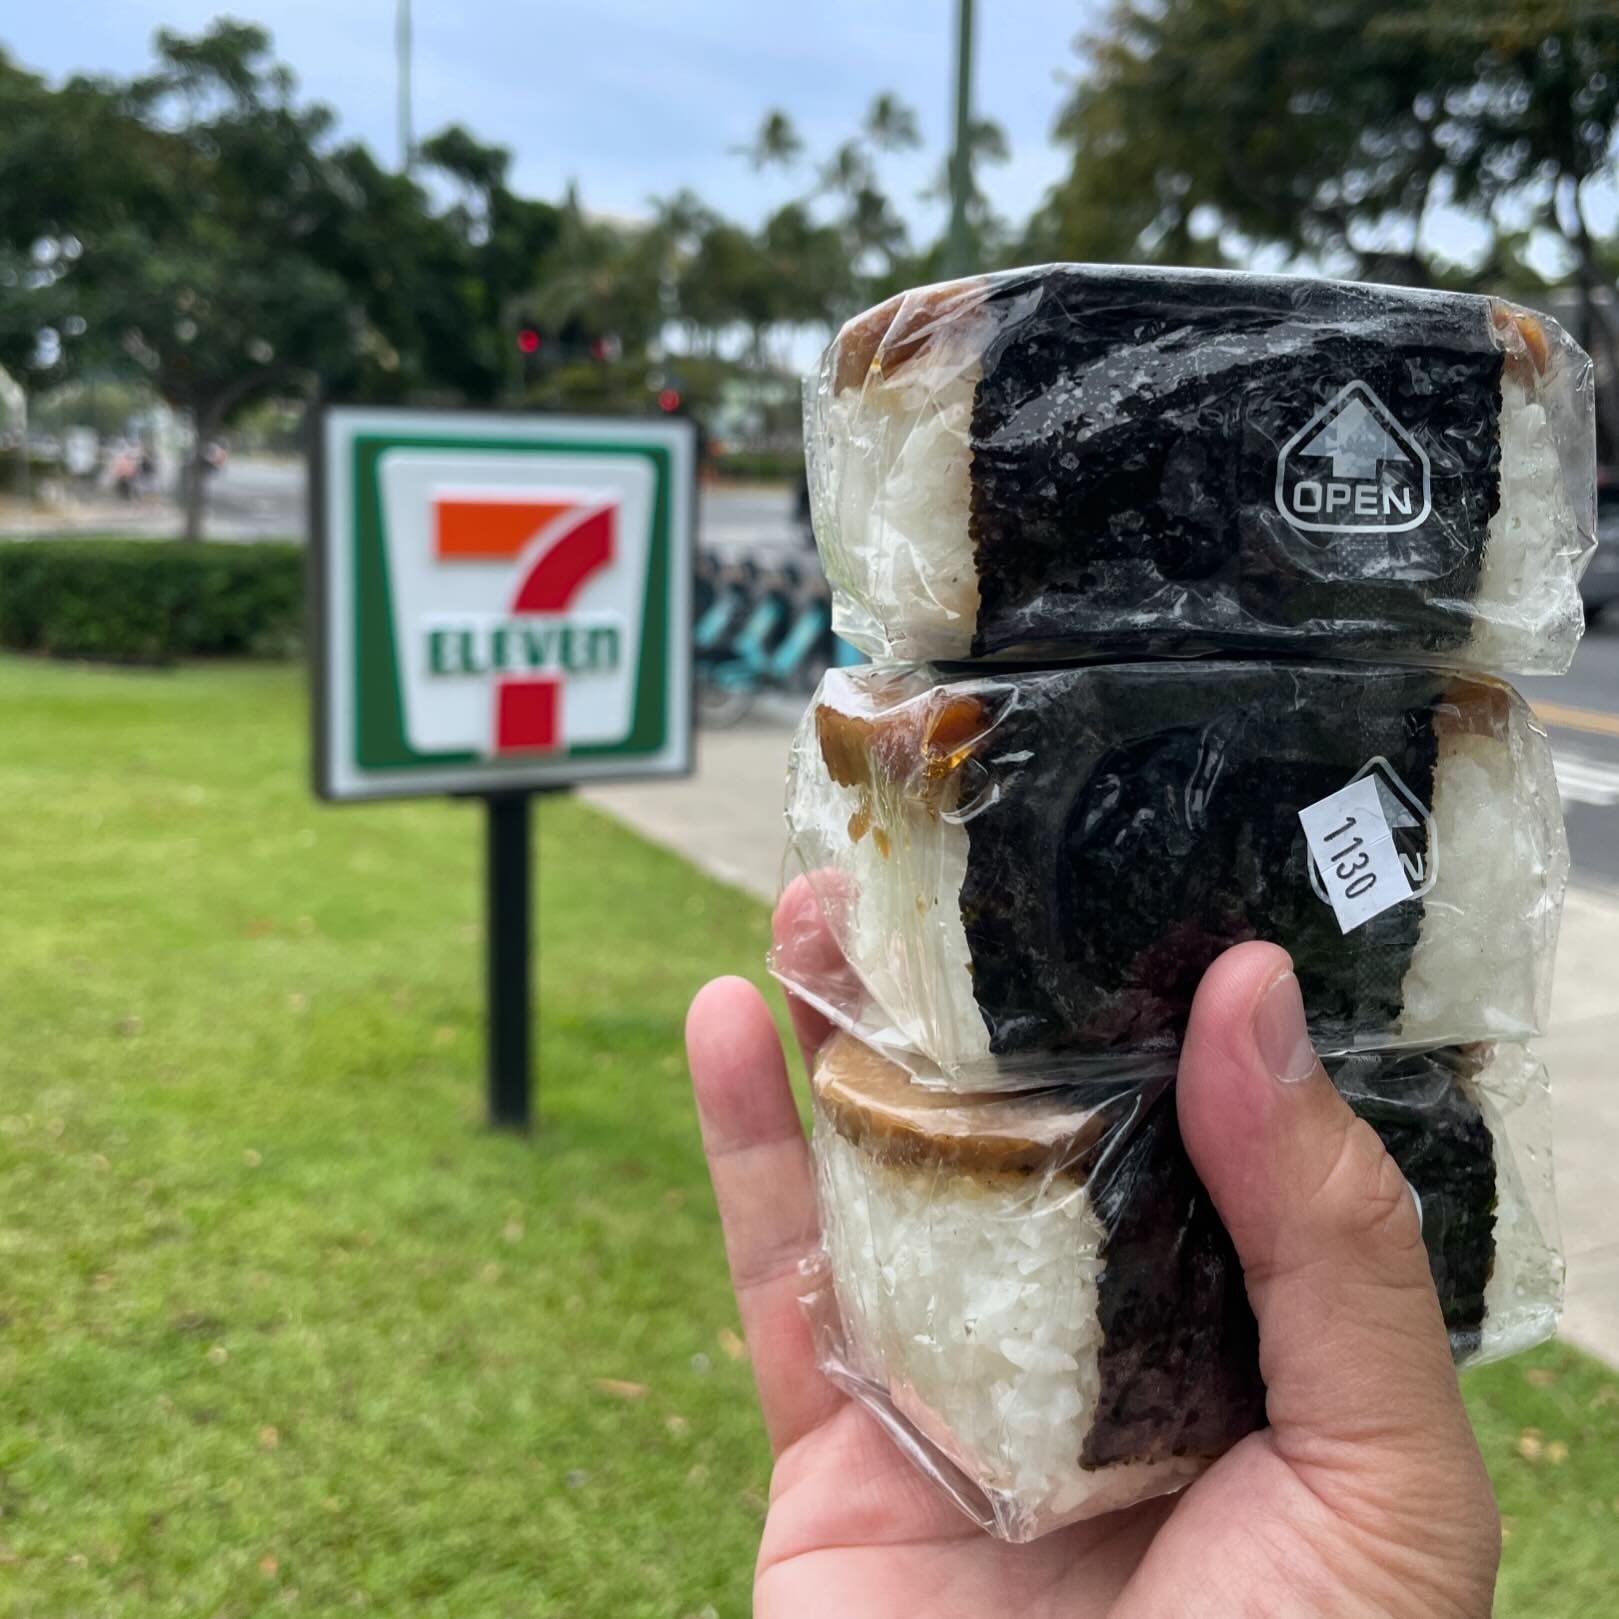 @7elevenhi is offering a Buy 2, Get 1 FREE Original SPAM Musubi until April 28 in partnership with the Waikiki SPAM JAM. This offer is available at the chains 67 locations in Hawaii.